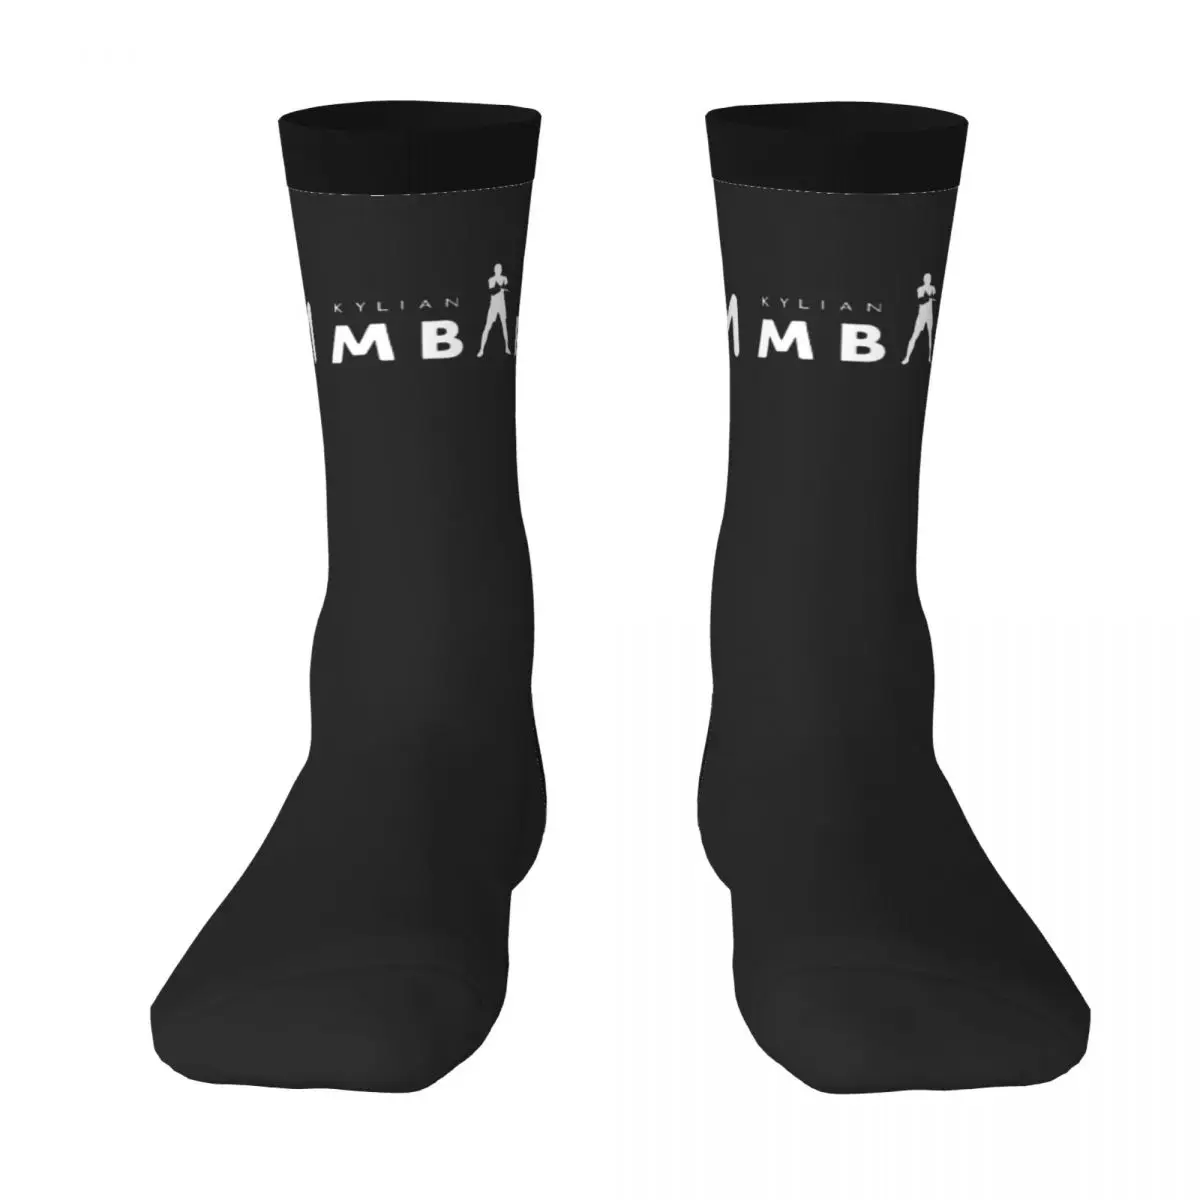 

Football Gift Stocking France Kylianer And Mbappﾩ And Mbappe (16) BEST TO BUY Humor Graphic Graphic Cool Rucksack Elastic Socks